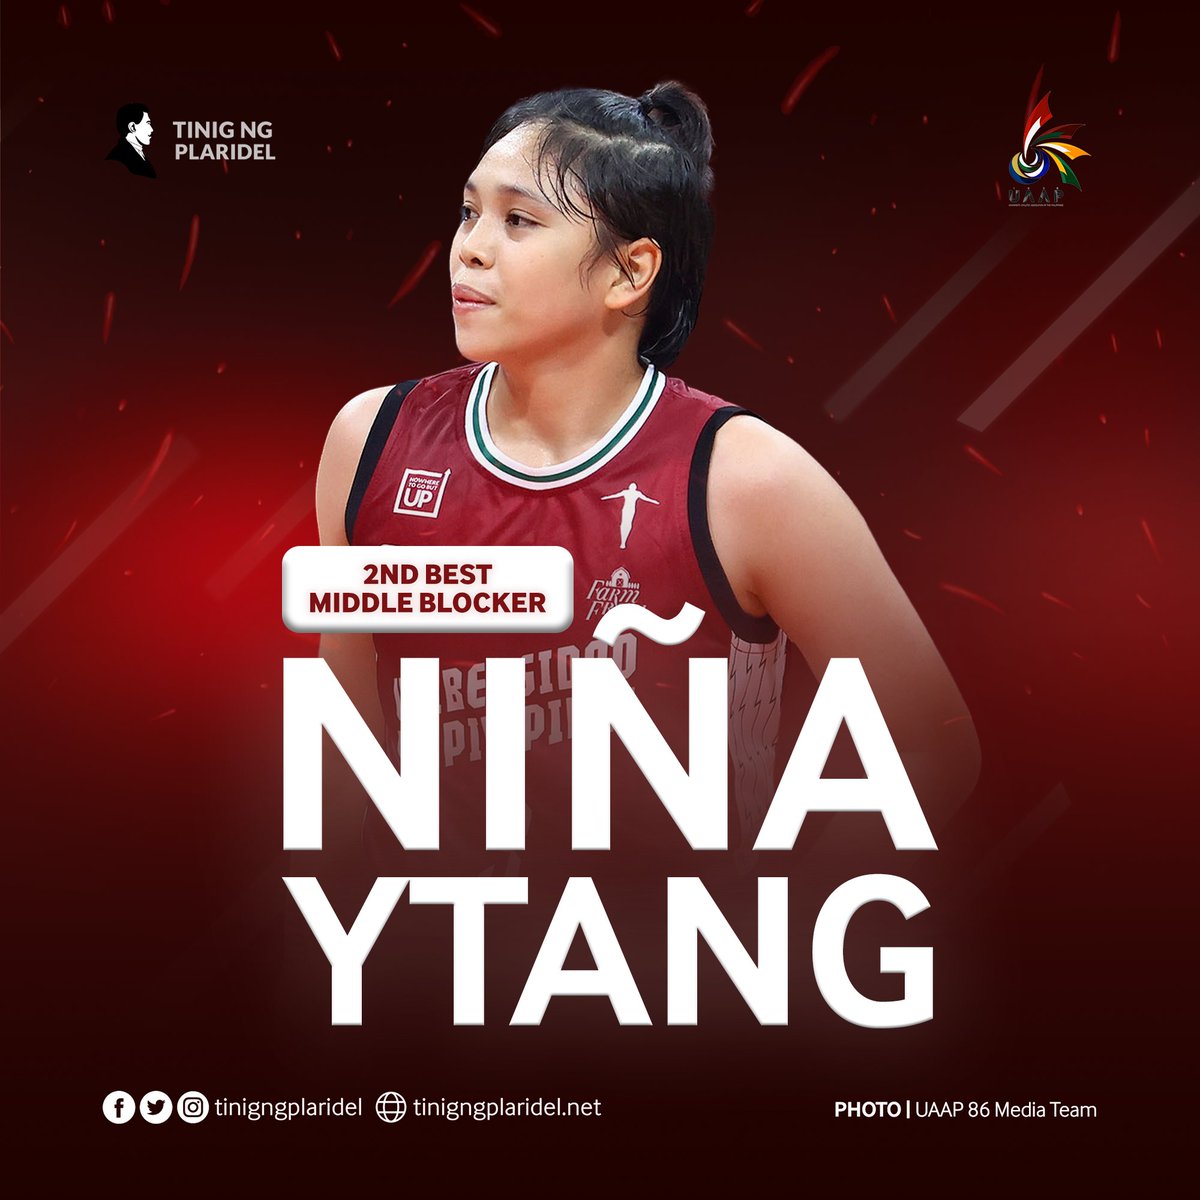 BACK-TO-BACK HONORS

Niña Ytang of the UP Women’s Volleyball Team was hailed as the 2nd best middle blocker for the second straight season in the #UAAPSeason86 Women’s Volleyball Tournament.

#UPFight